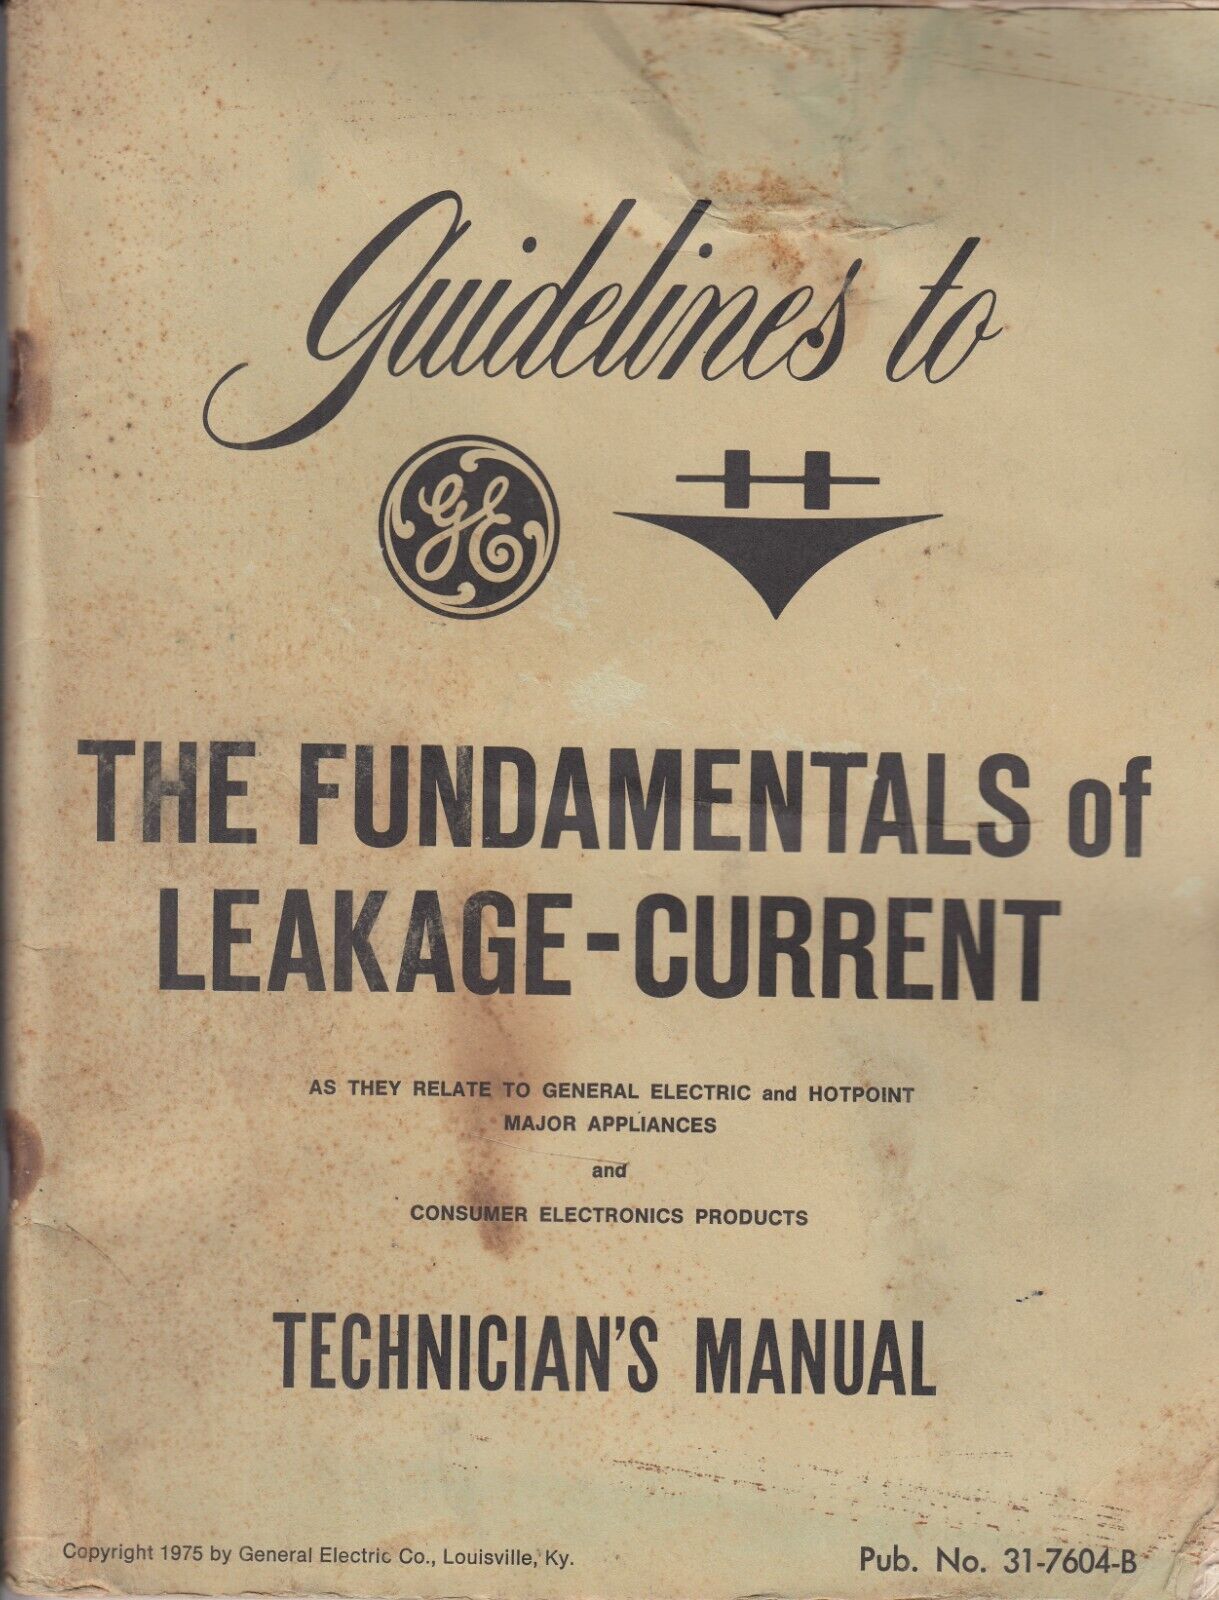 GUIDLINES TO THE FUNDAMENTALS OF LEAKAGE - CURRENT -   GE HOTPOINT APPLIANCES